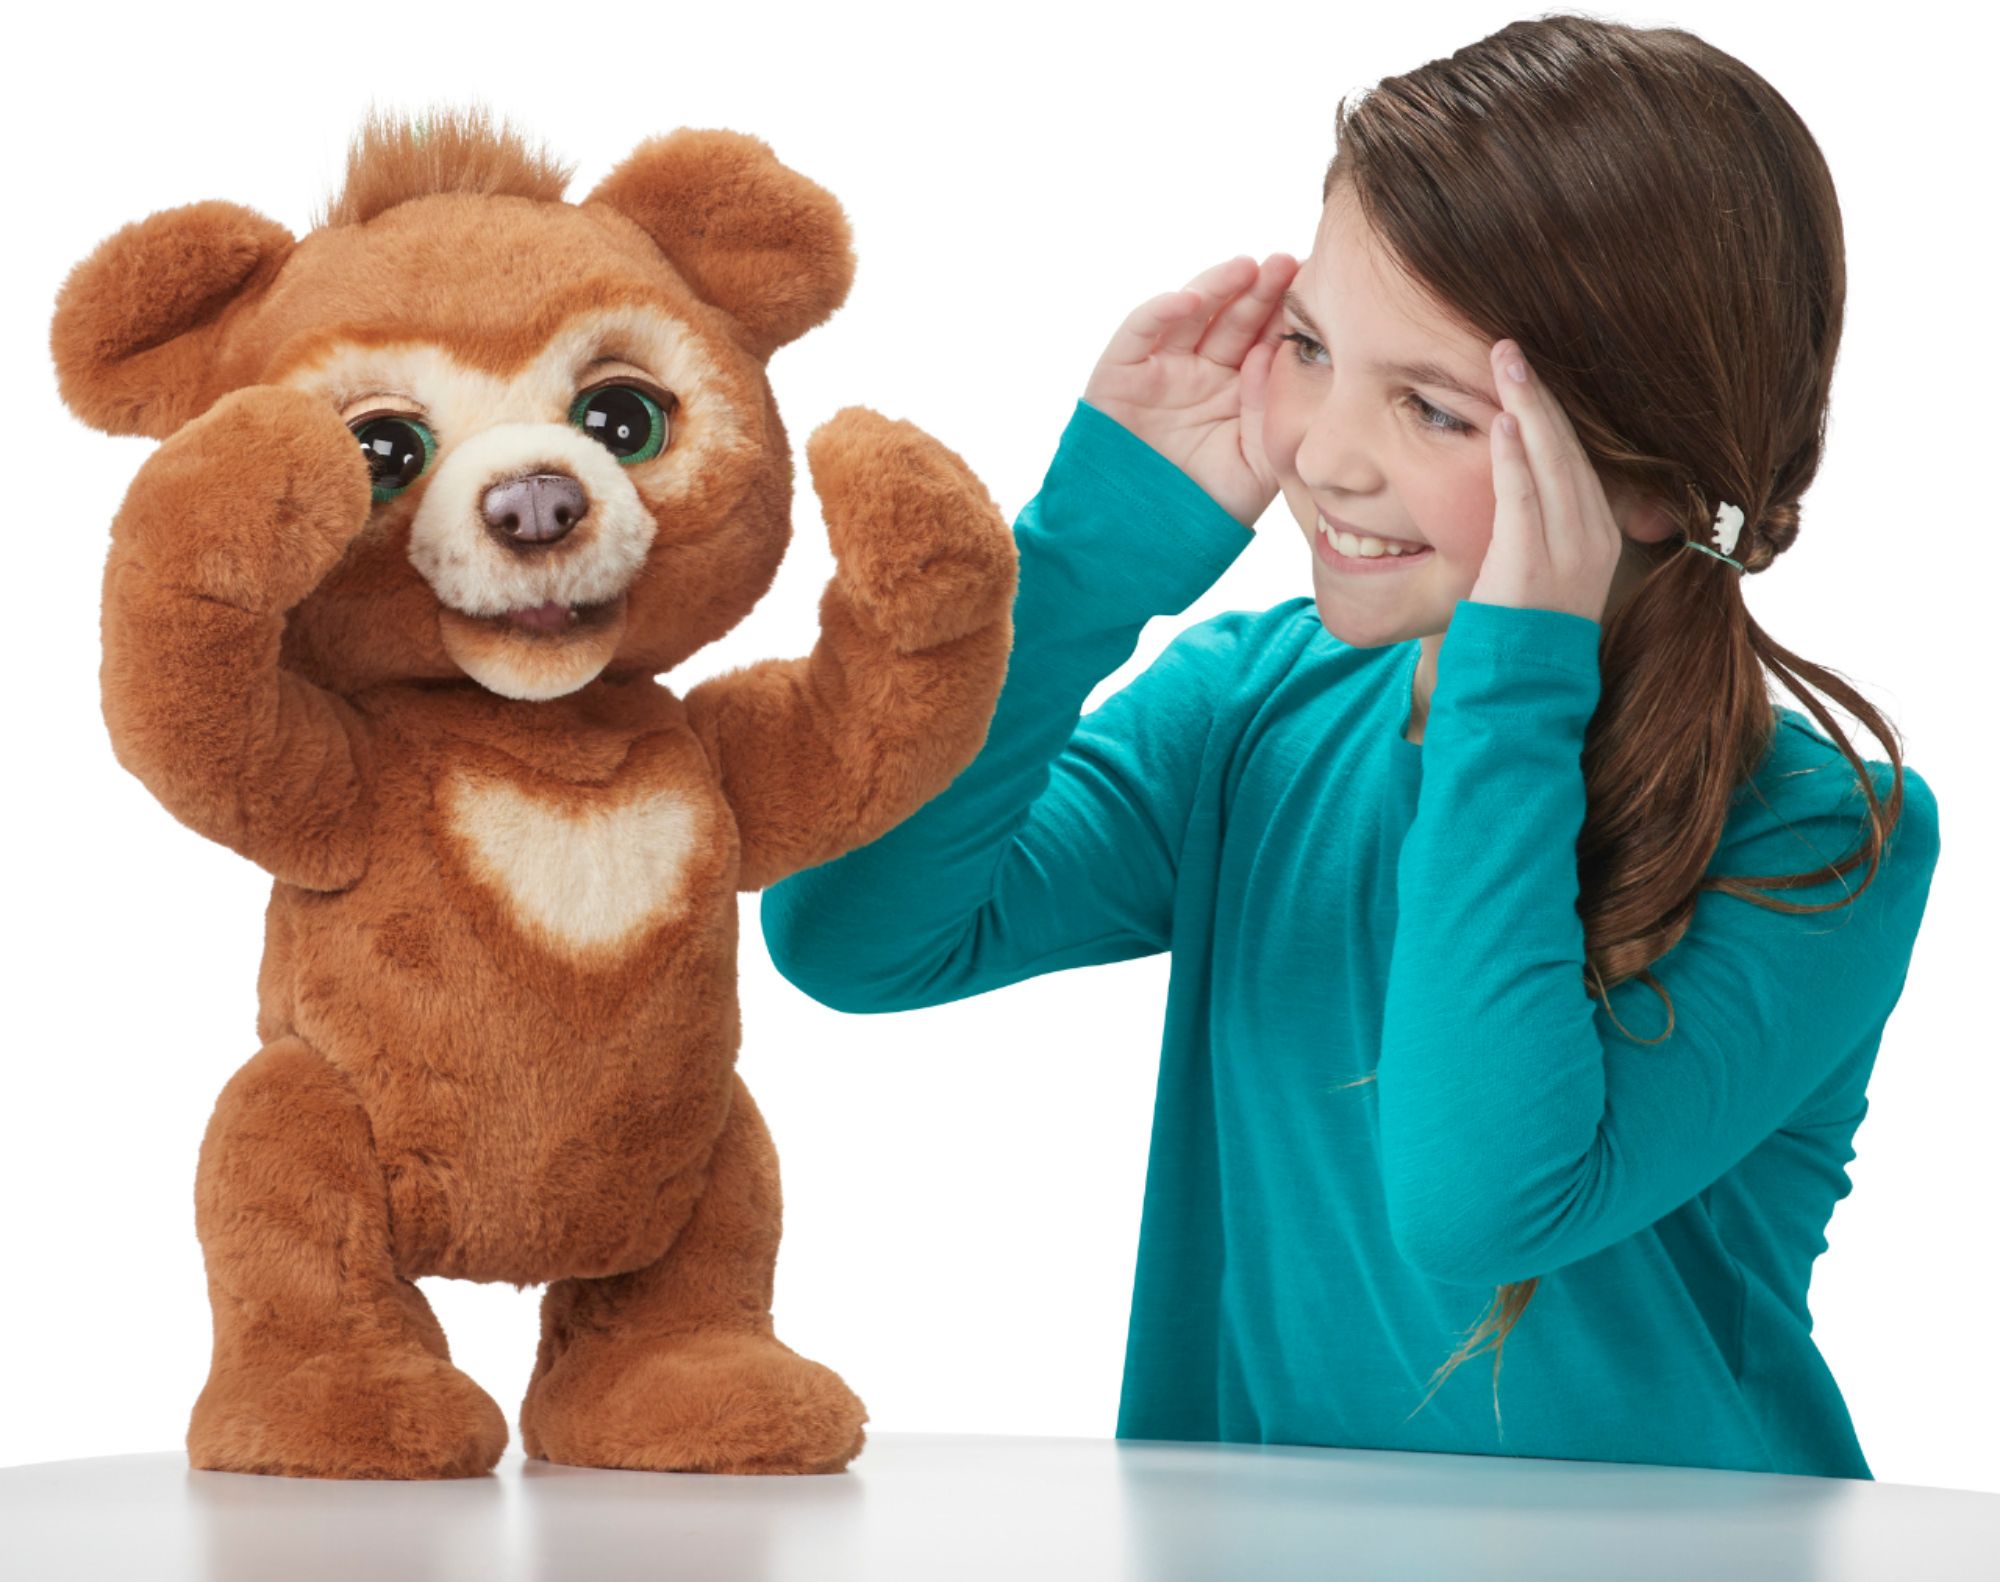 E4591 for sale online FurReal  Cubby The Curious Bear Interactive Plush Toy 